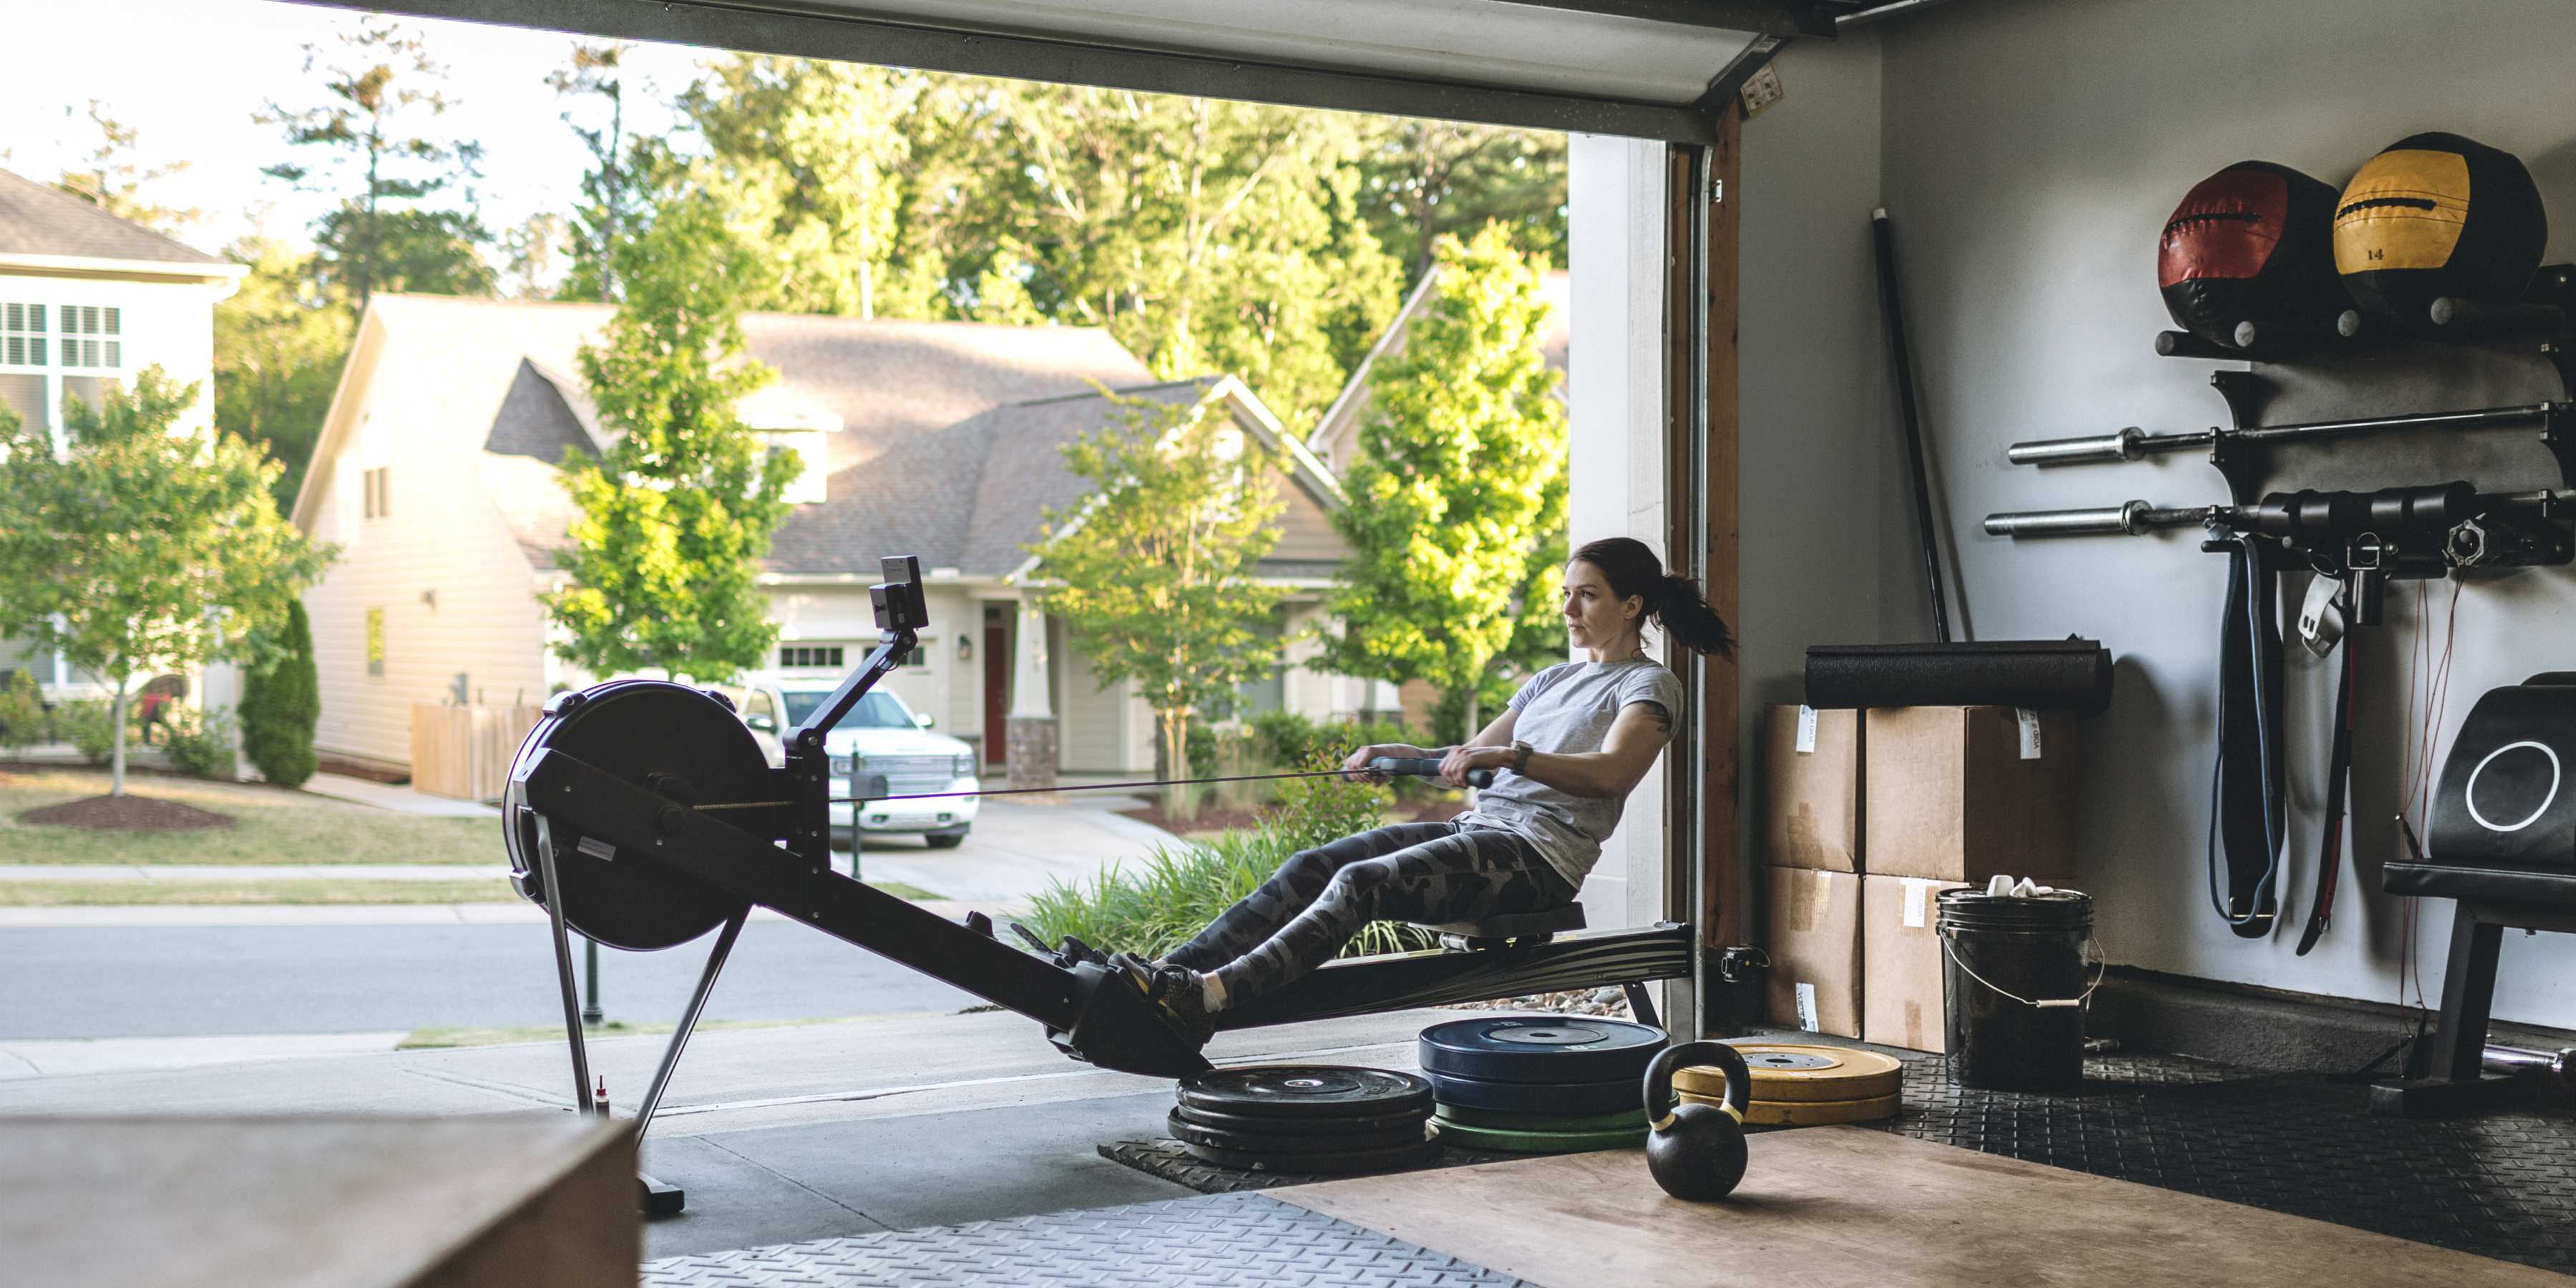 An image of a woman using a rowing machine at home